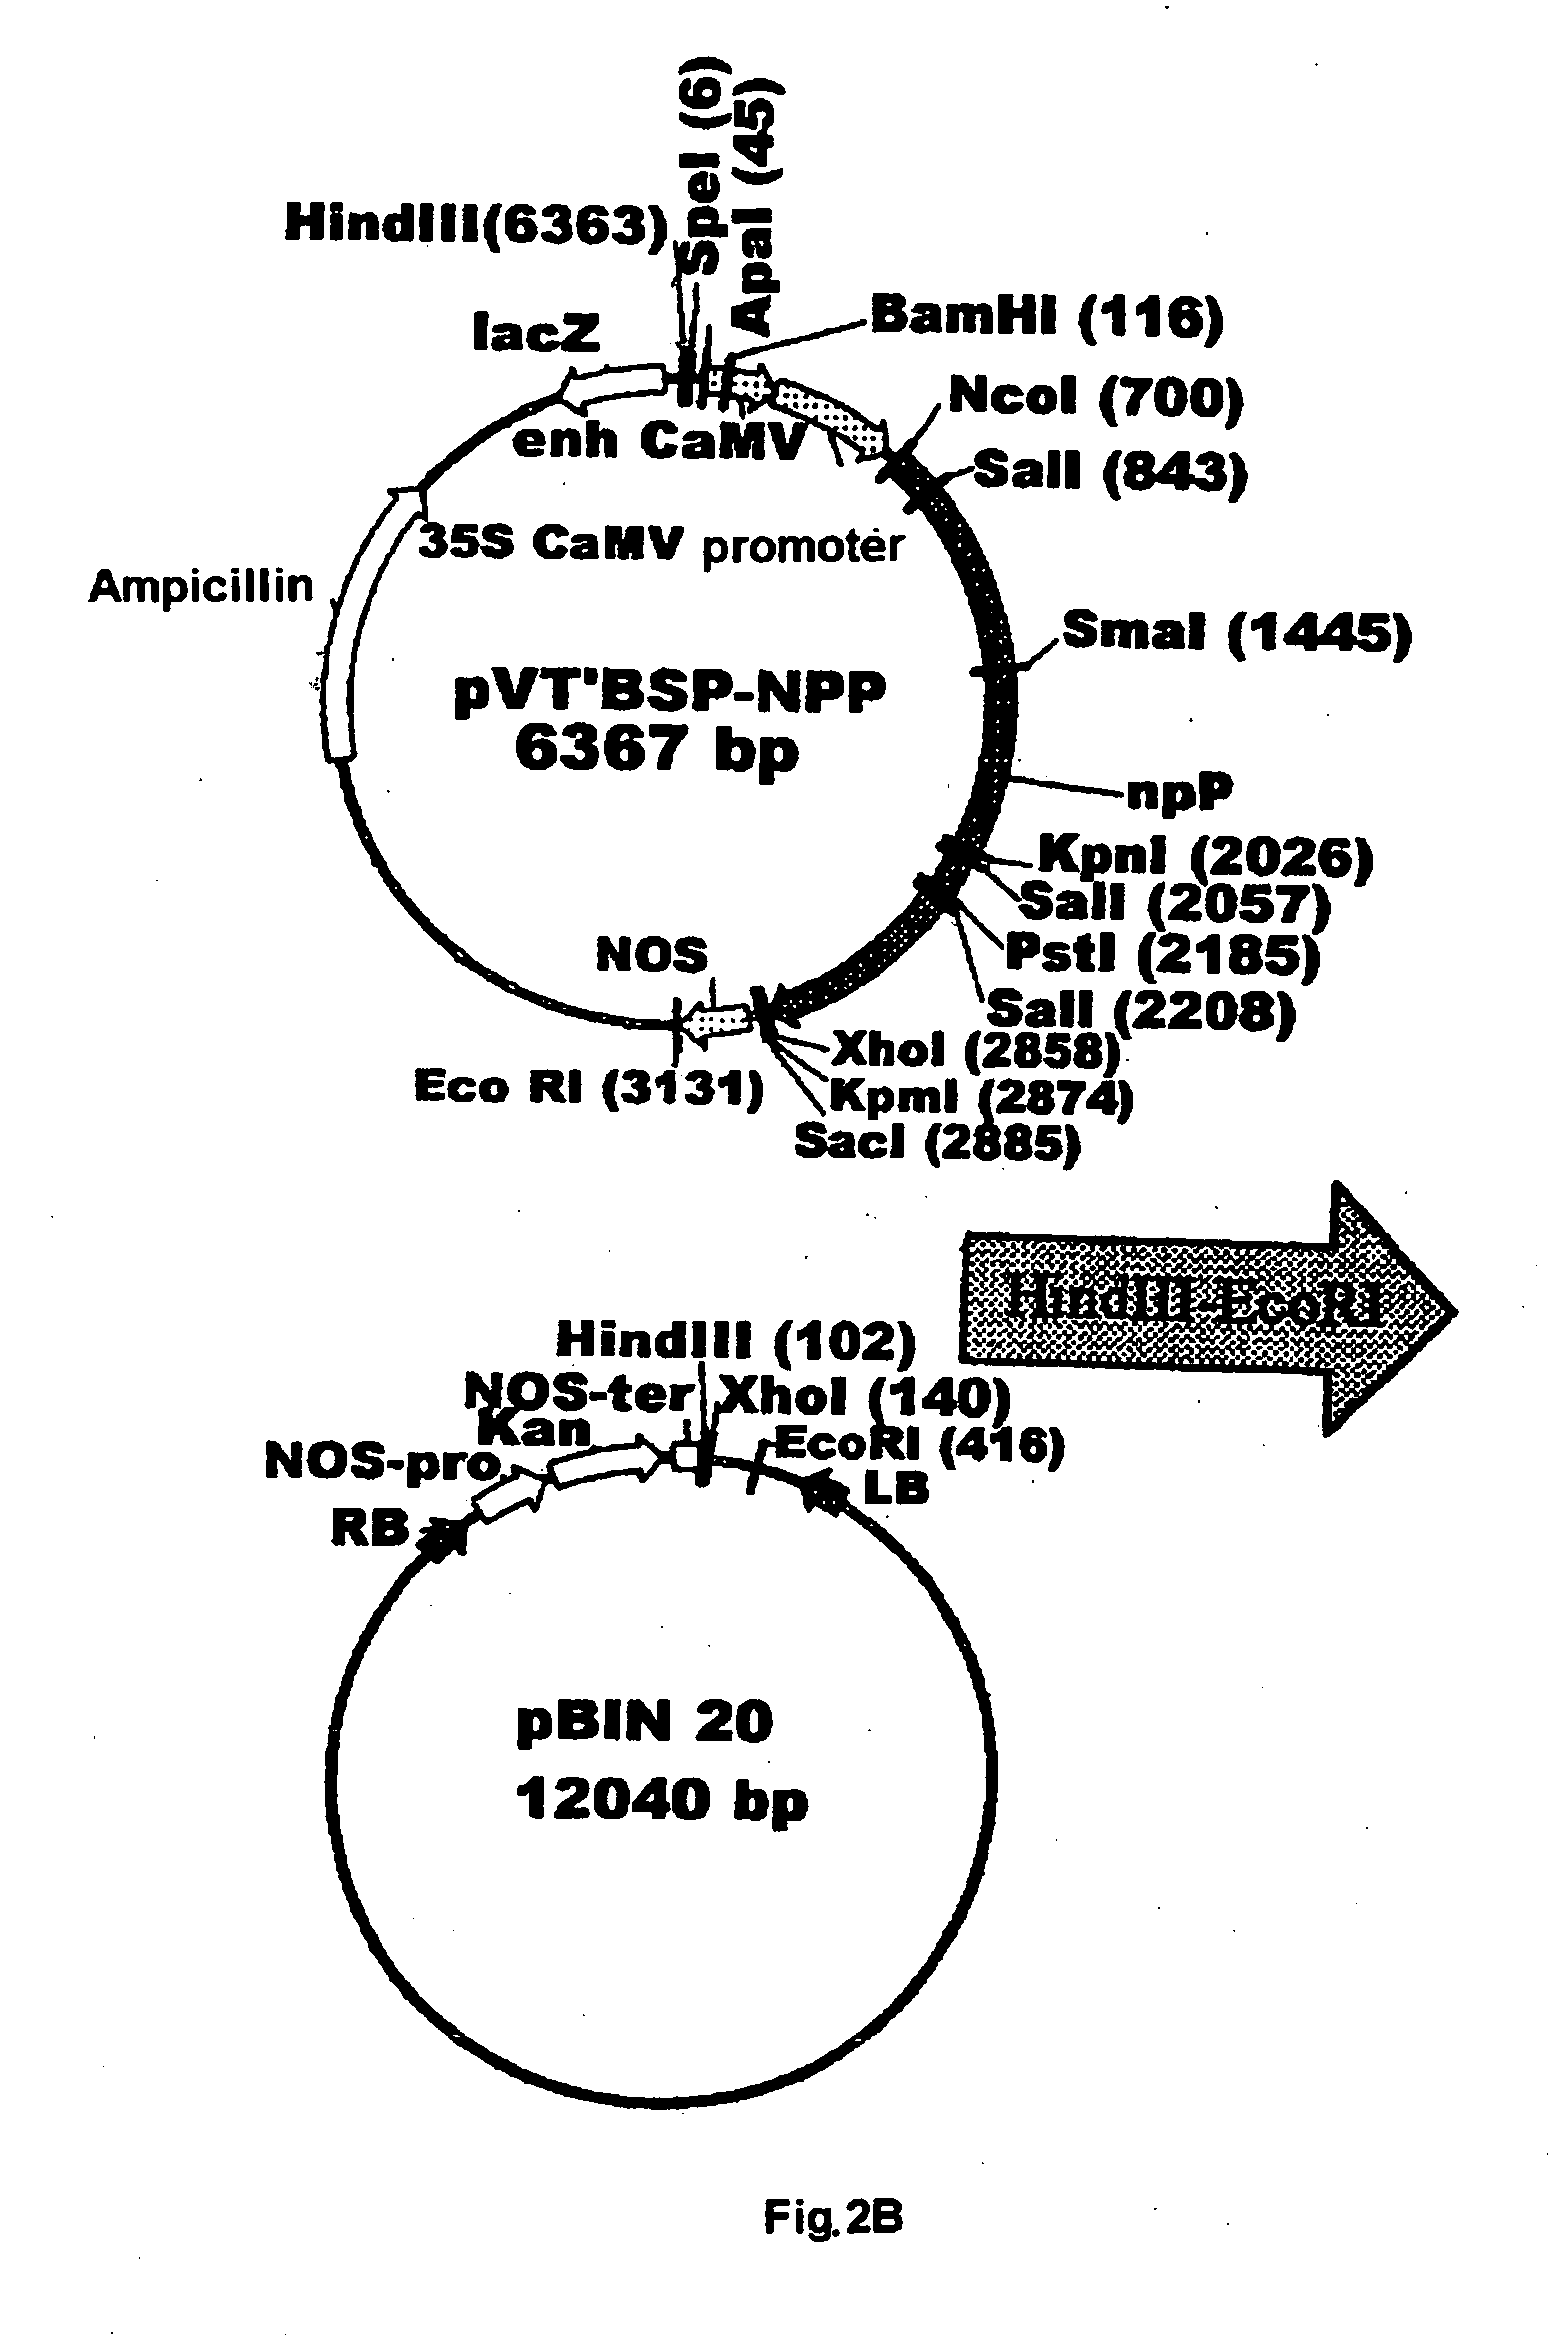 Plant nucleotide-sugar pyrophosphatase/phosphodiesterase (nppase), method of obtaining same and use of same in the production of assay devices and in the production of transgenic plants